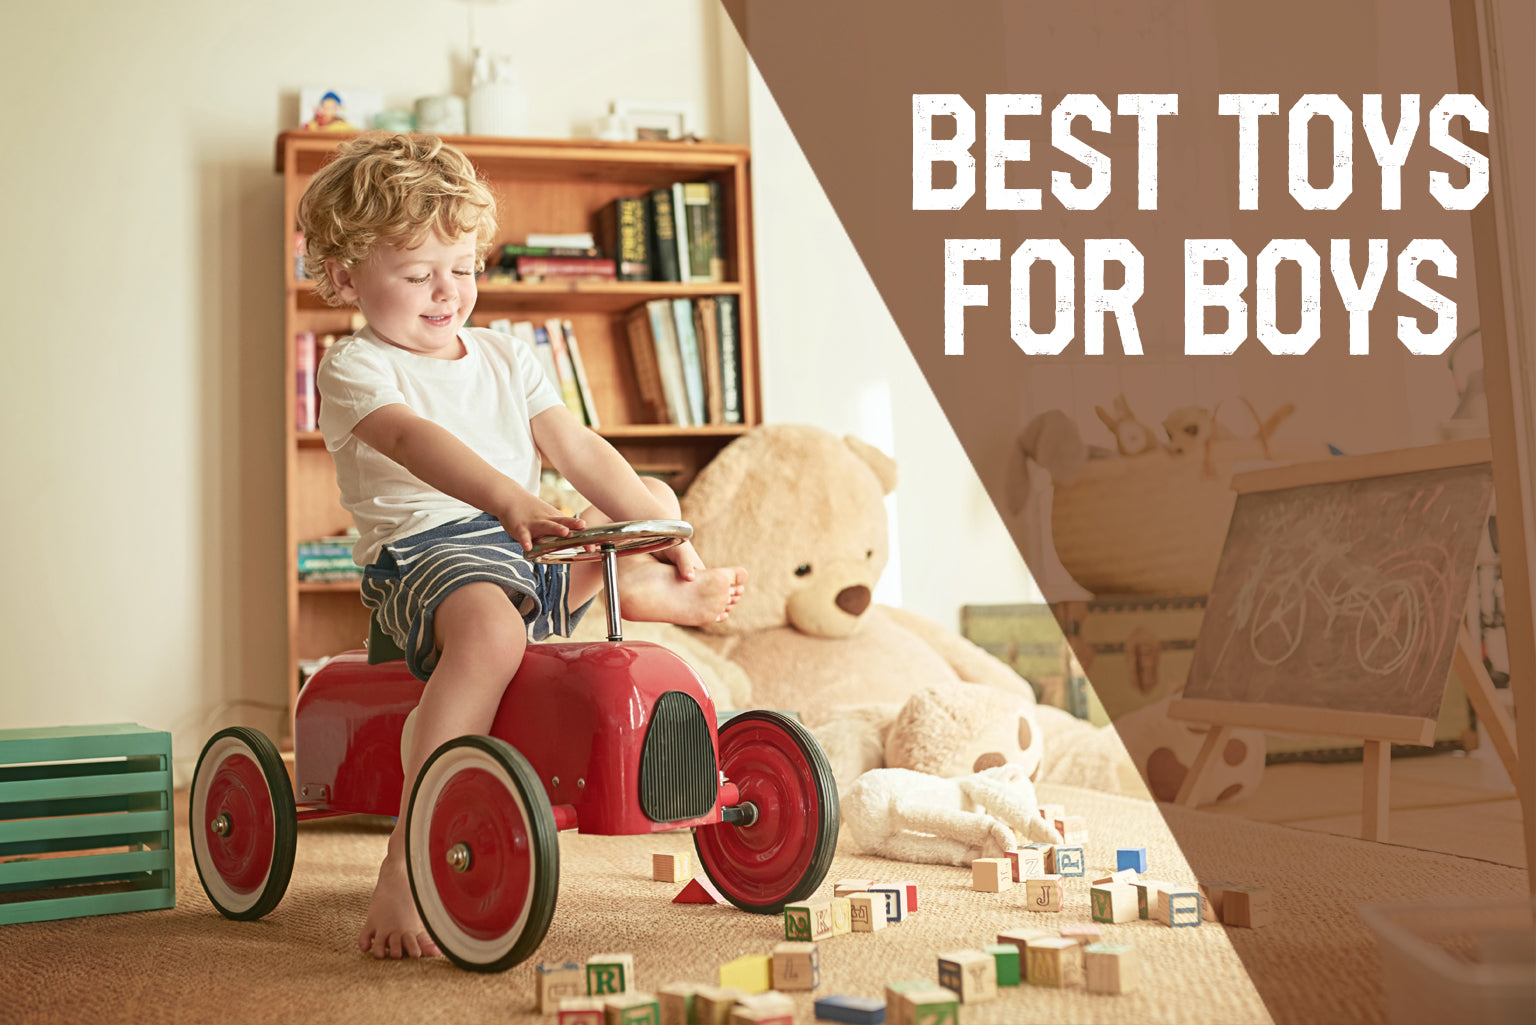 Toys for Boys: Inspiring Growth, Adventure, and Joy! - The Magic Toy Shop Blog